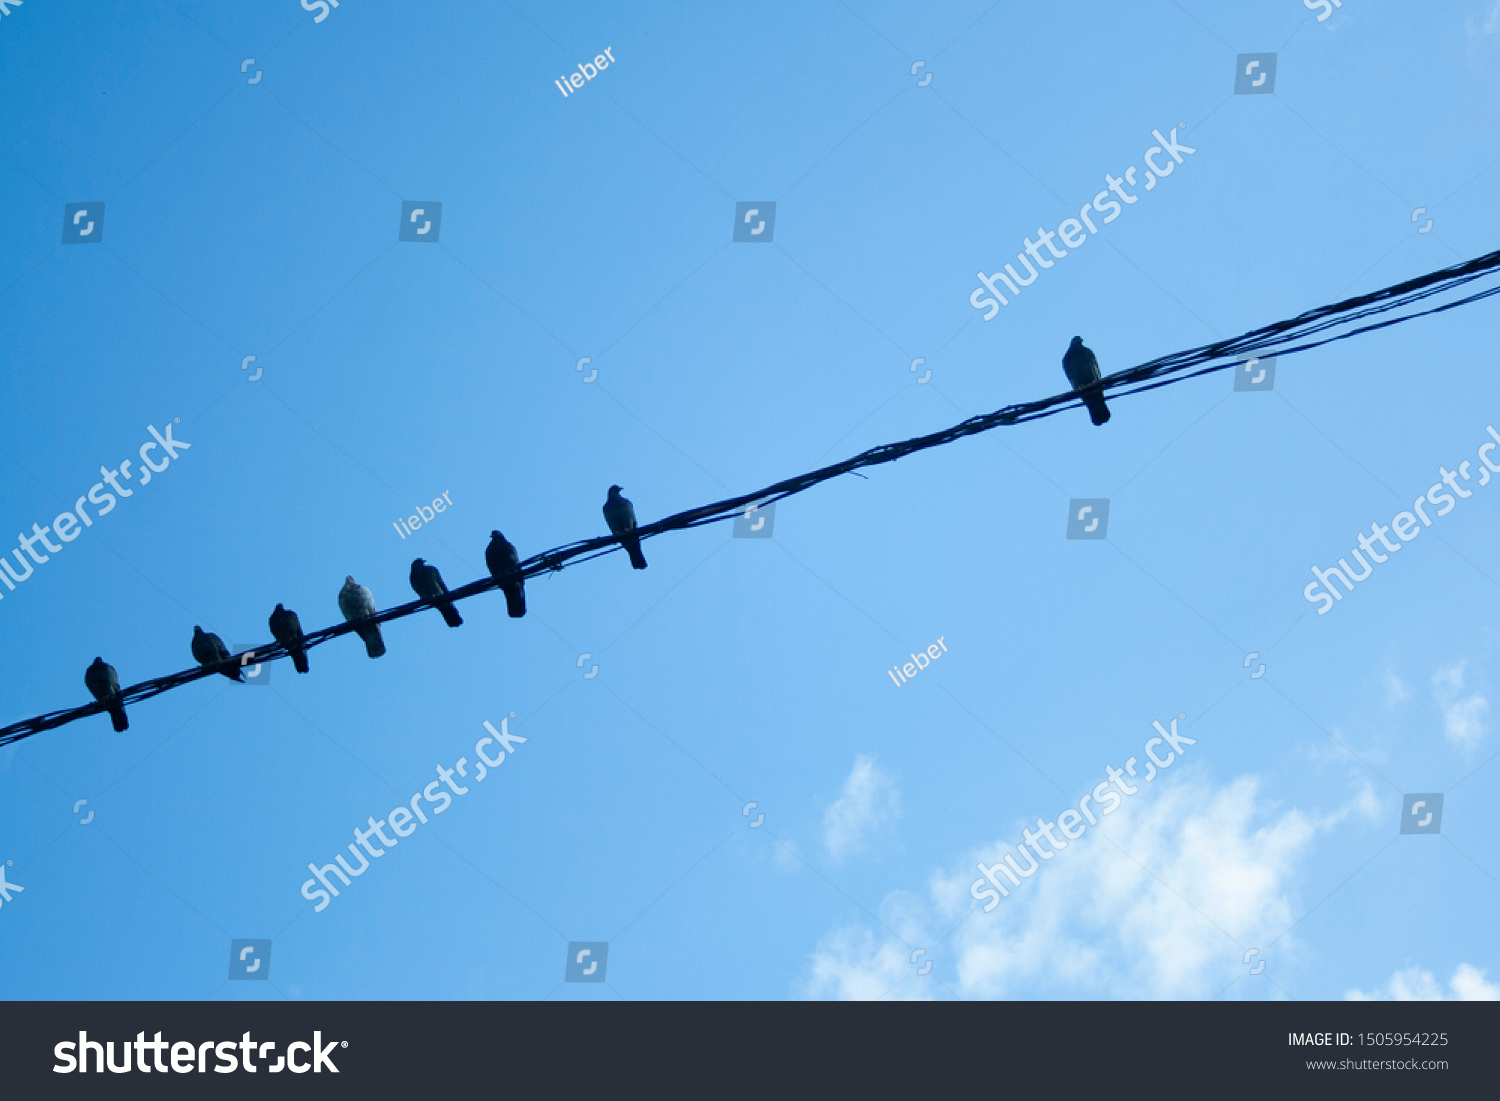 Individuality concept, independent thinker symbol, many pigeon birds on a wire with one individual in the opposition as a business icon. herd thinking #1505954225